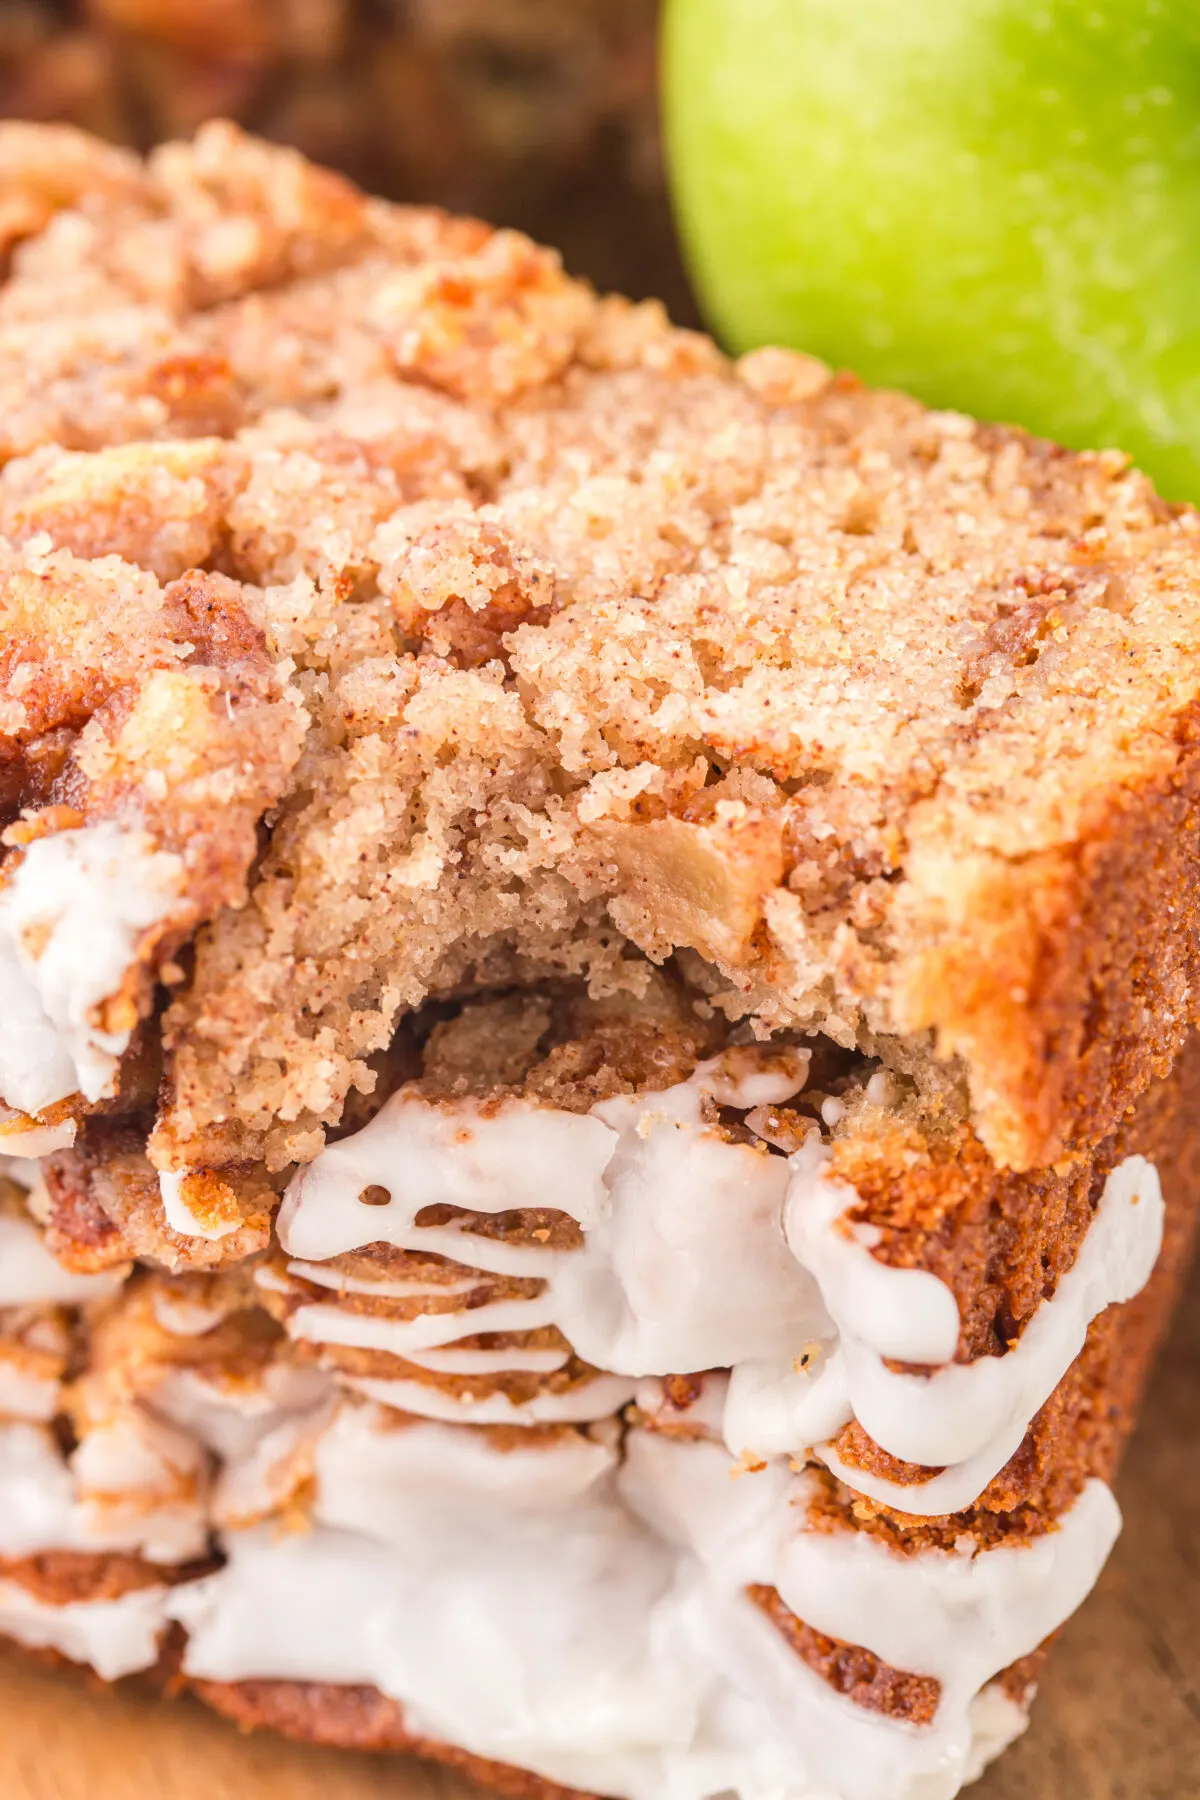 Nothing beats the smell of freshly baked homemade apple cinnamon bread. It's so good, you won't be able to stop at just one slice!